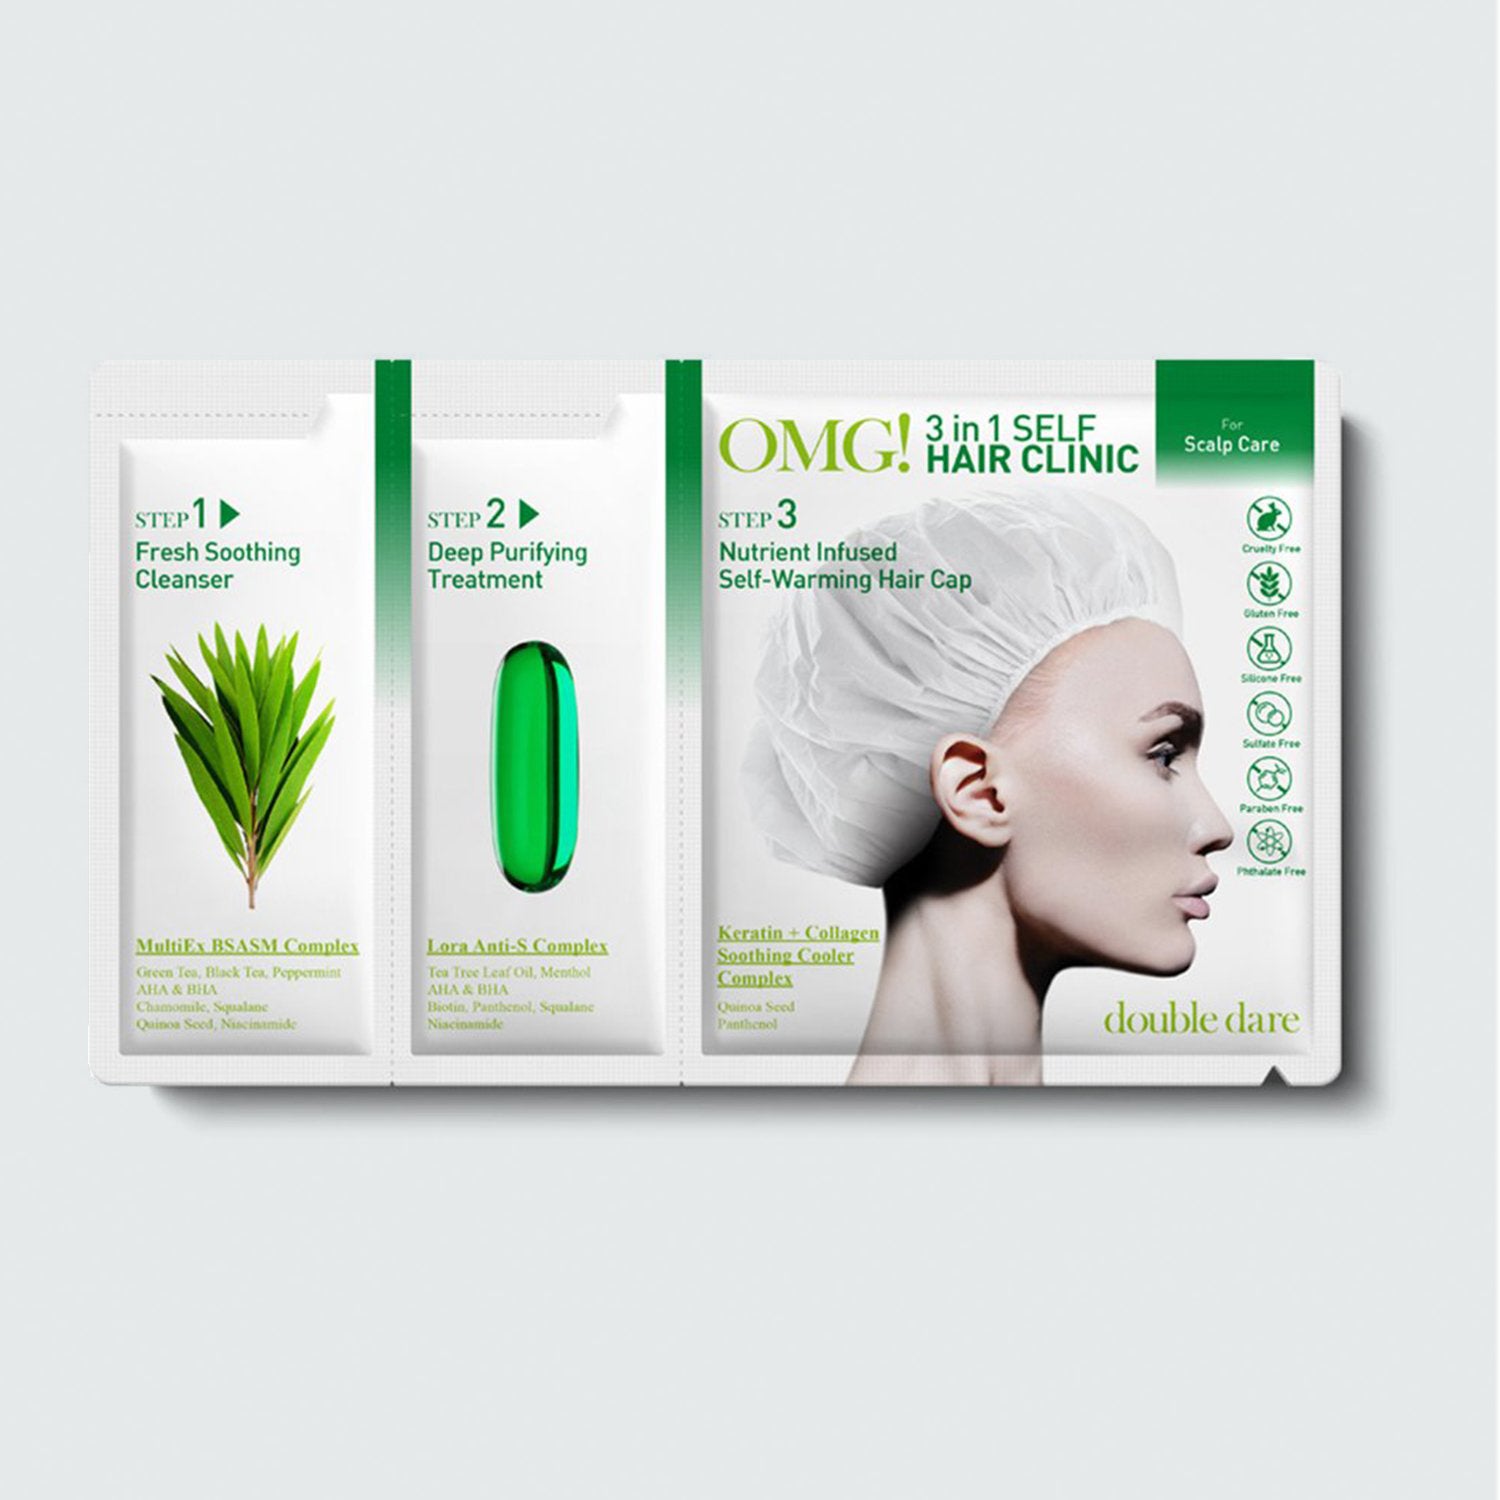 OMG! 3in1 SELF HAIR <br> CLINIC for Scalp Care - DOUBLE DARE